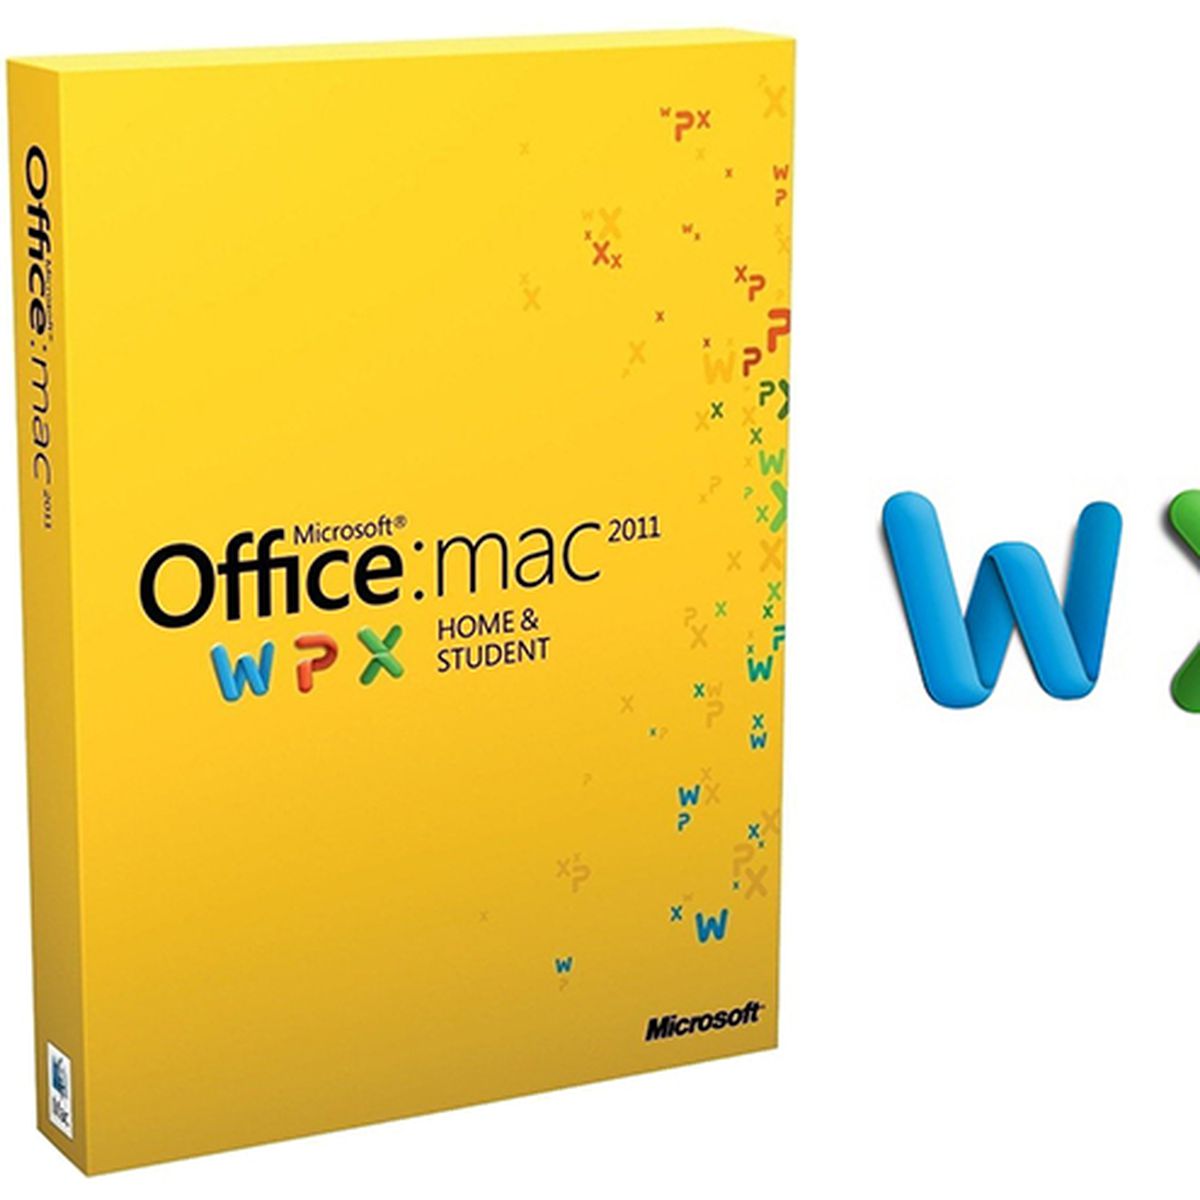 set out of office in outlook for mac 2011